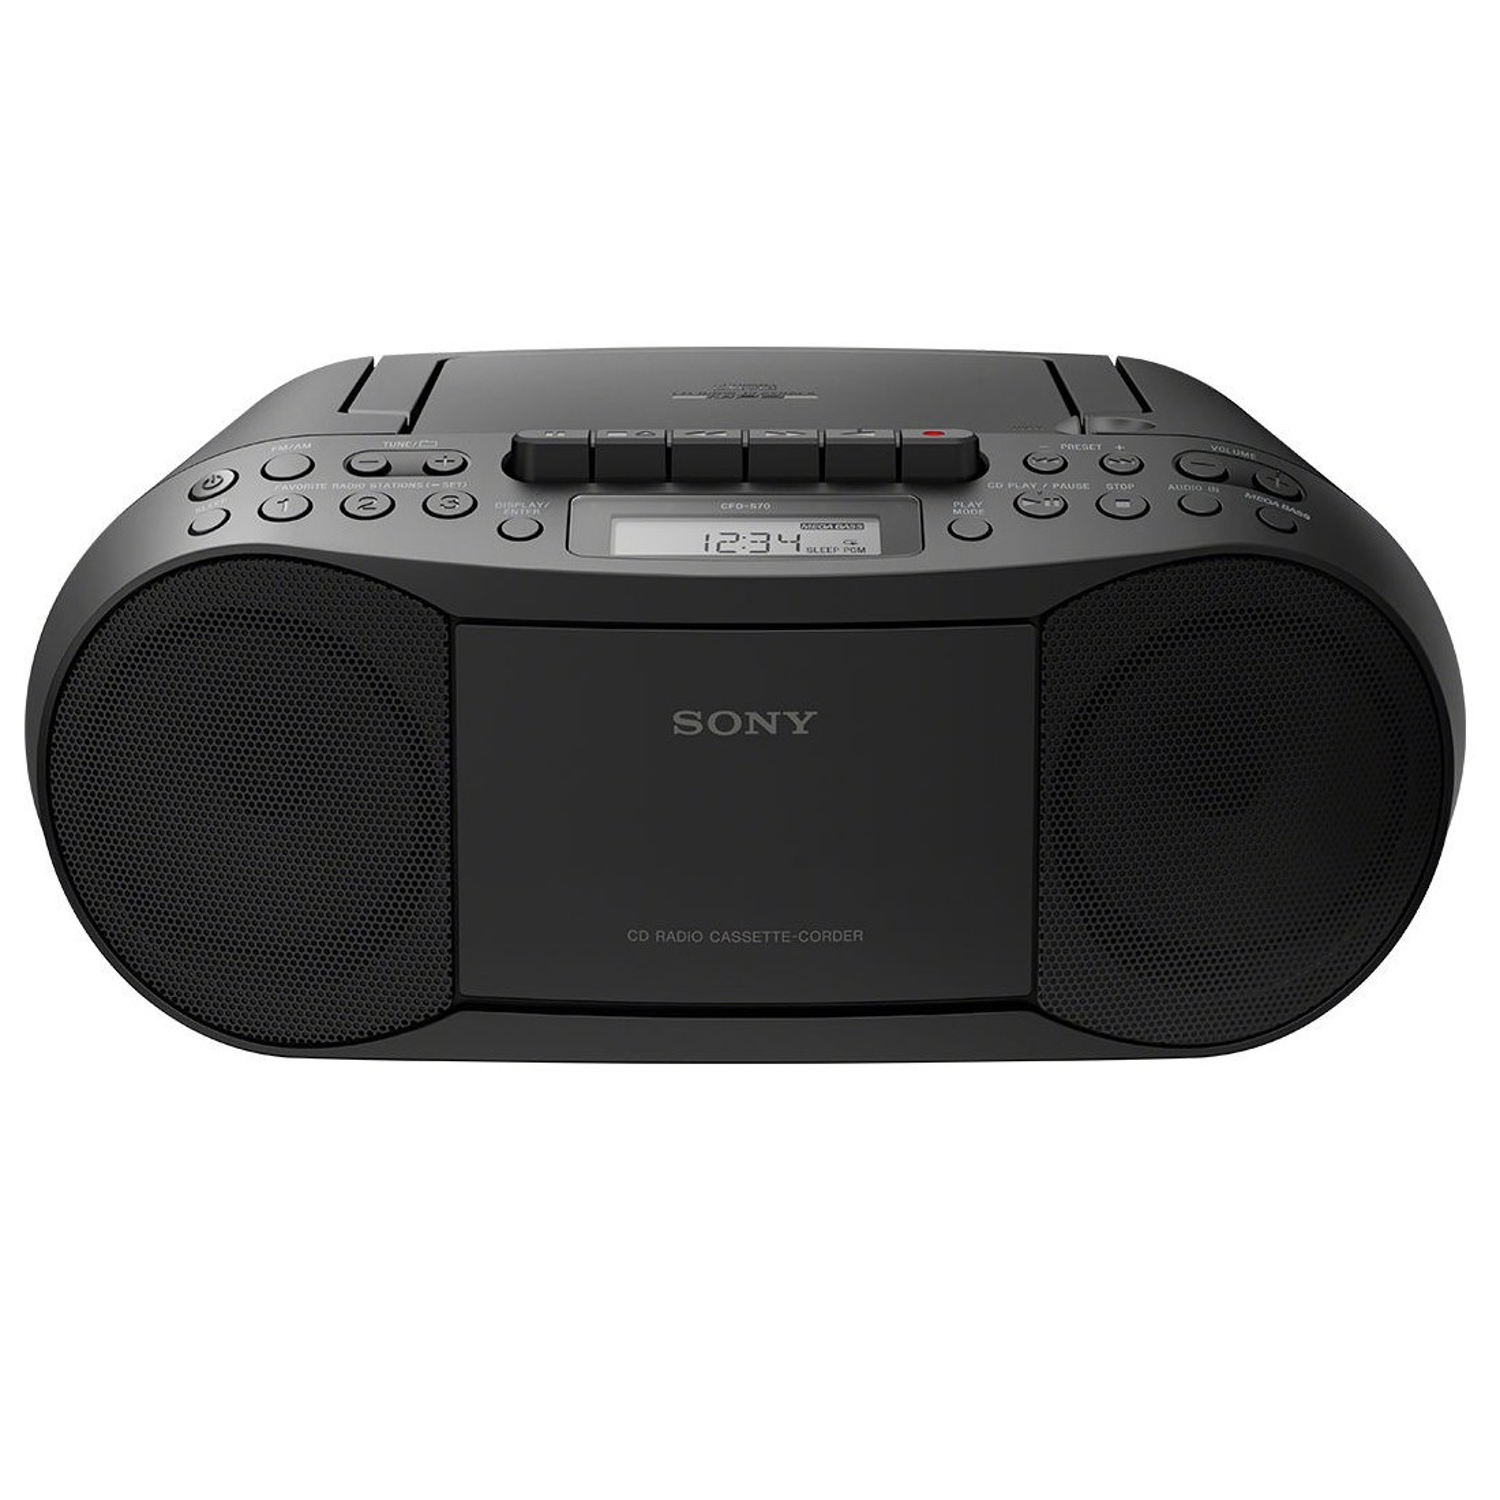 Sony Cass/CD/Radio Boom Box x 1.7w RMS 30 - McMichaels | Sony Centre & Euronics Stores